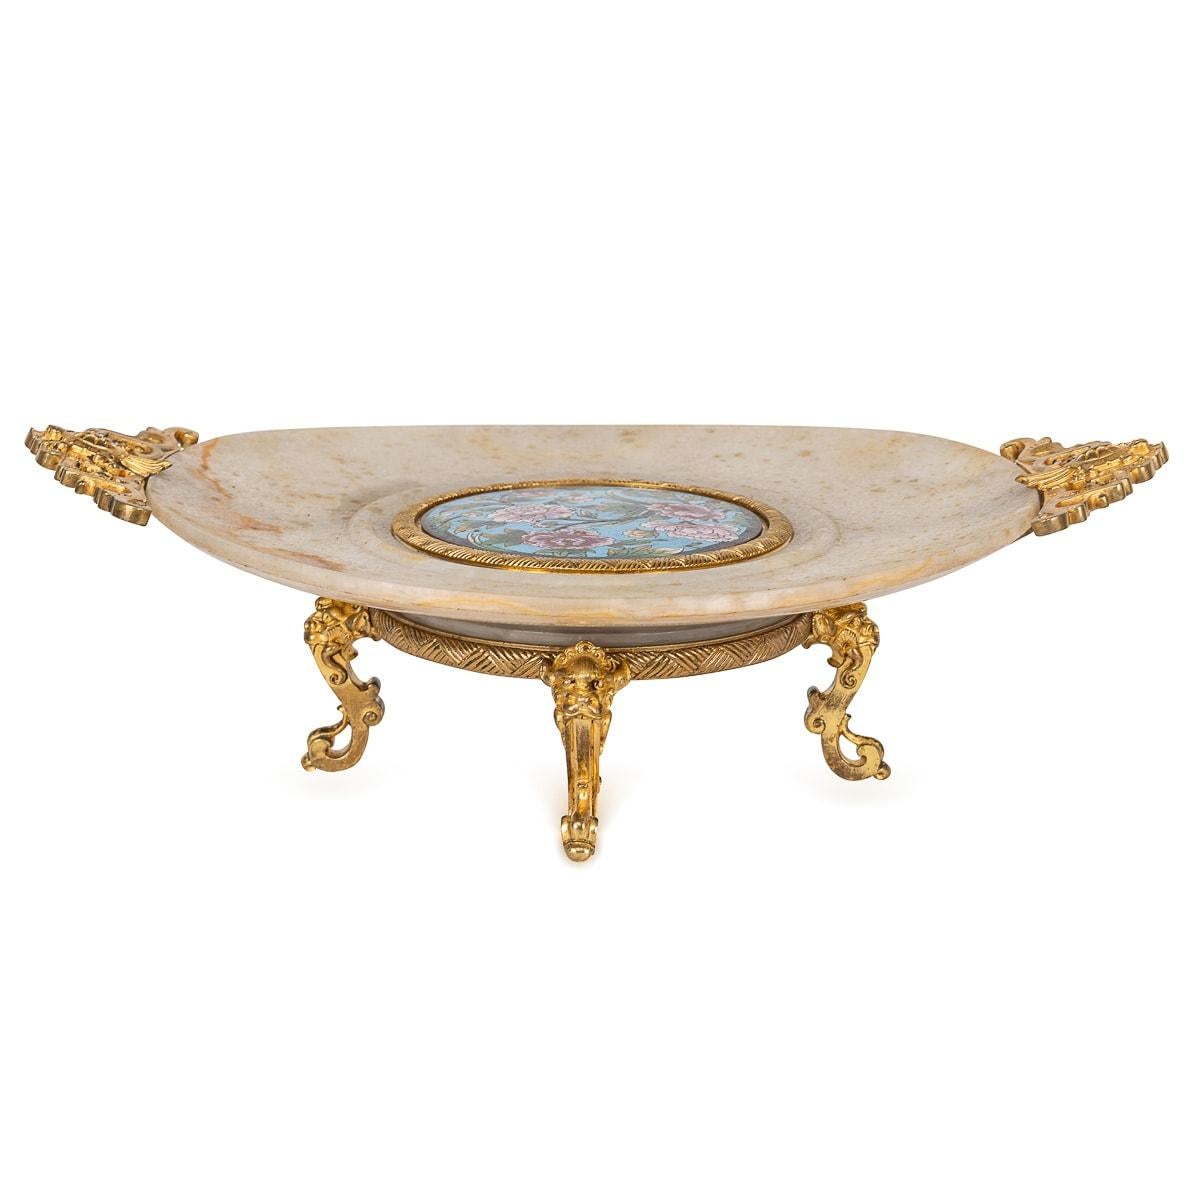 Other 19th Century French Ormolu Mounted Onyx Marble & Enamel Centrepiece c.1880 For Sale